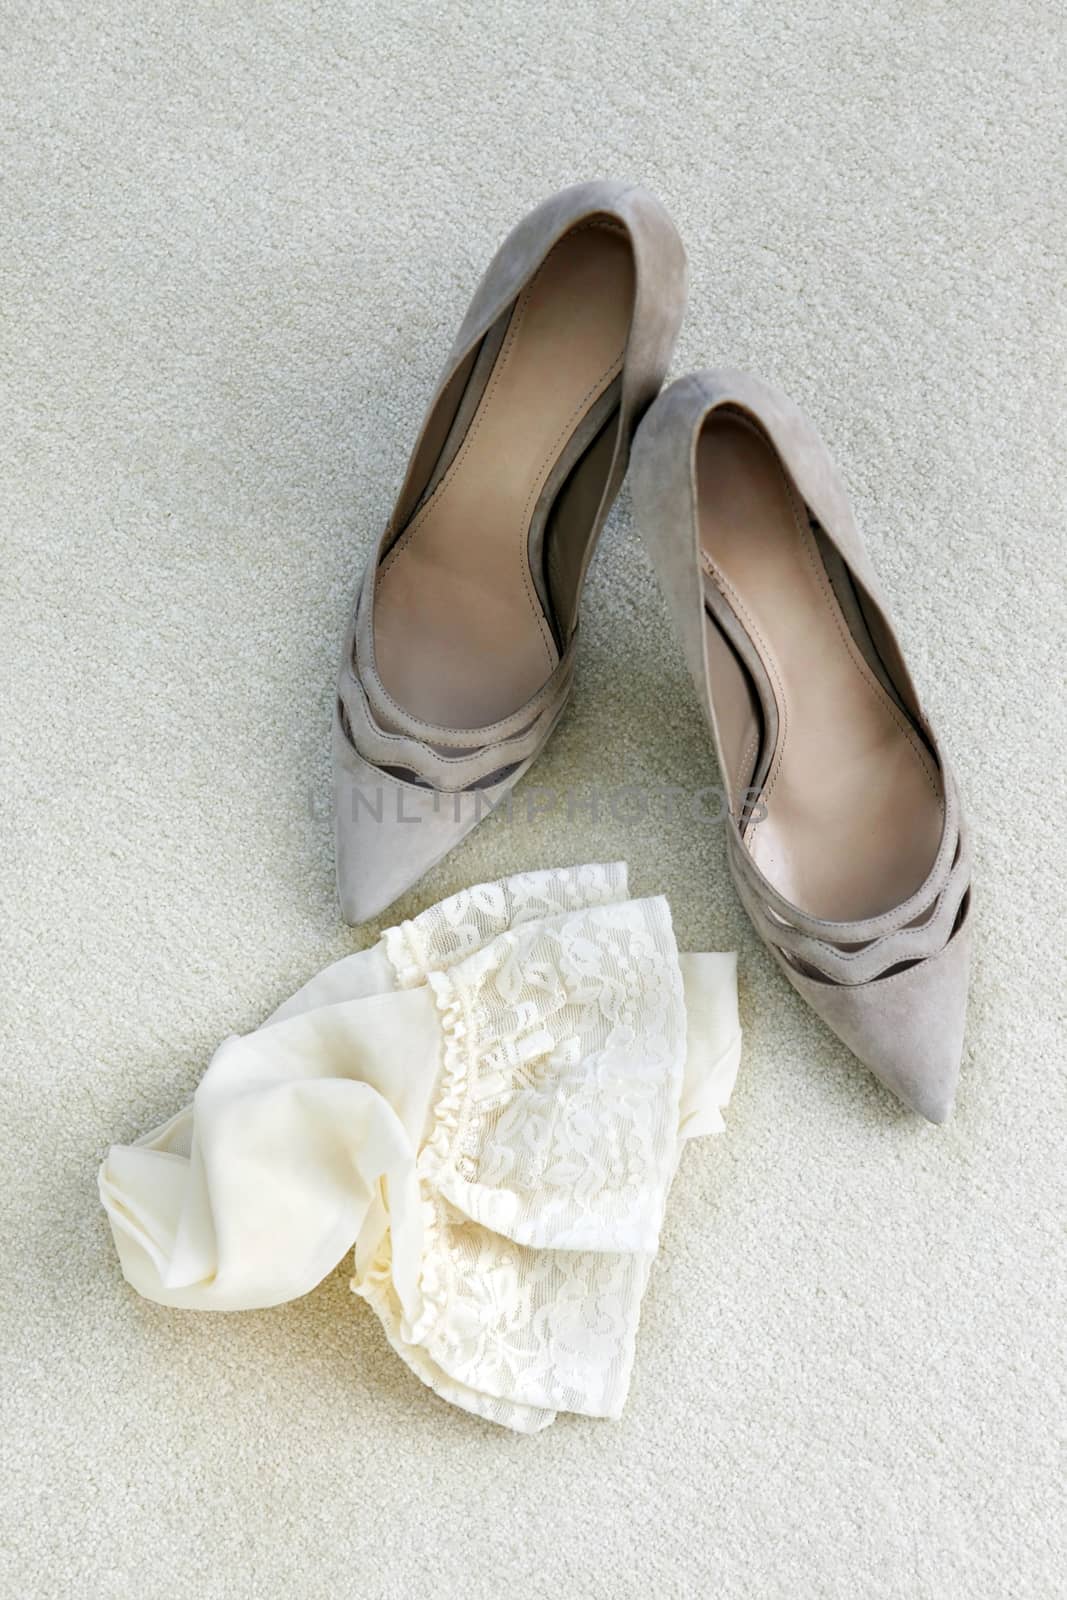 Wedding shoes by friday